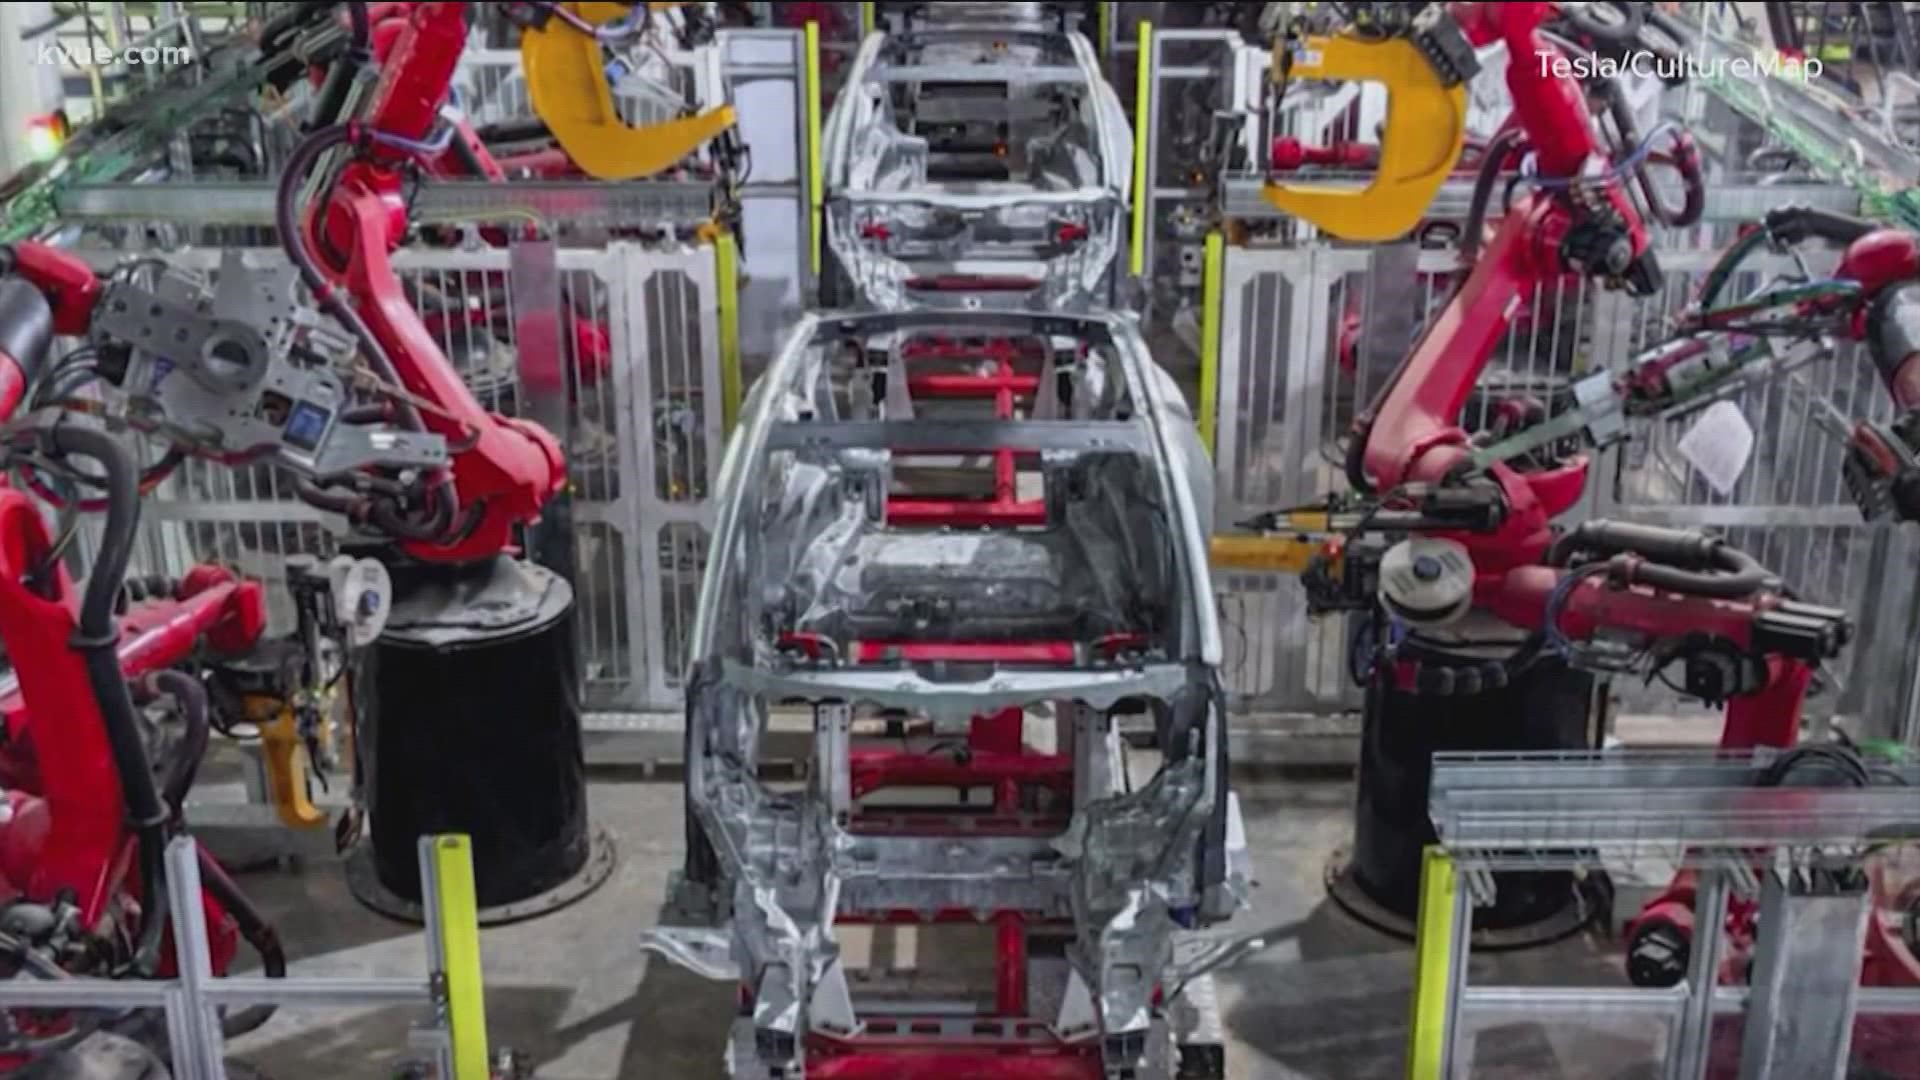 The events comes as Tesla opens a new factory in Central Texas.